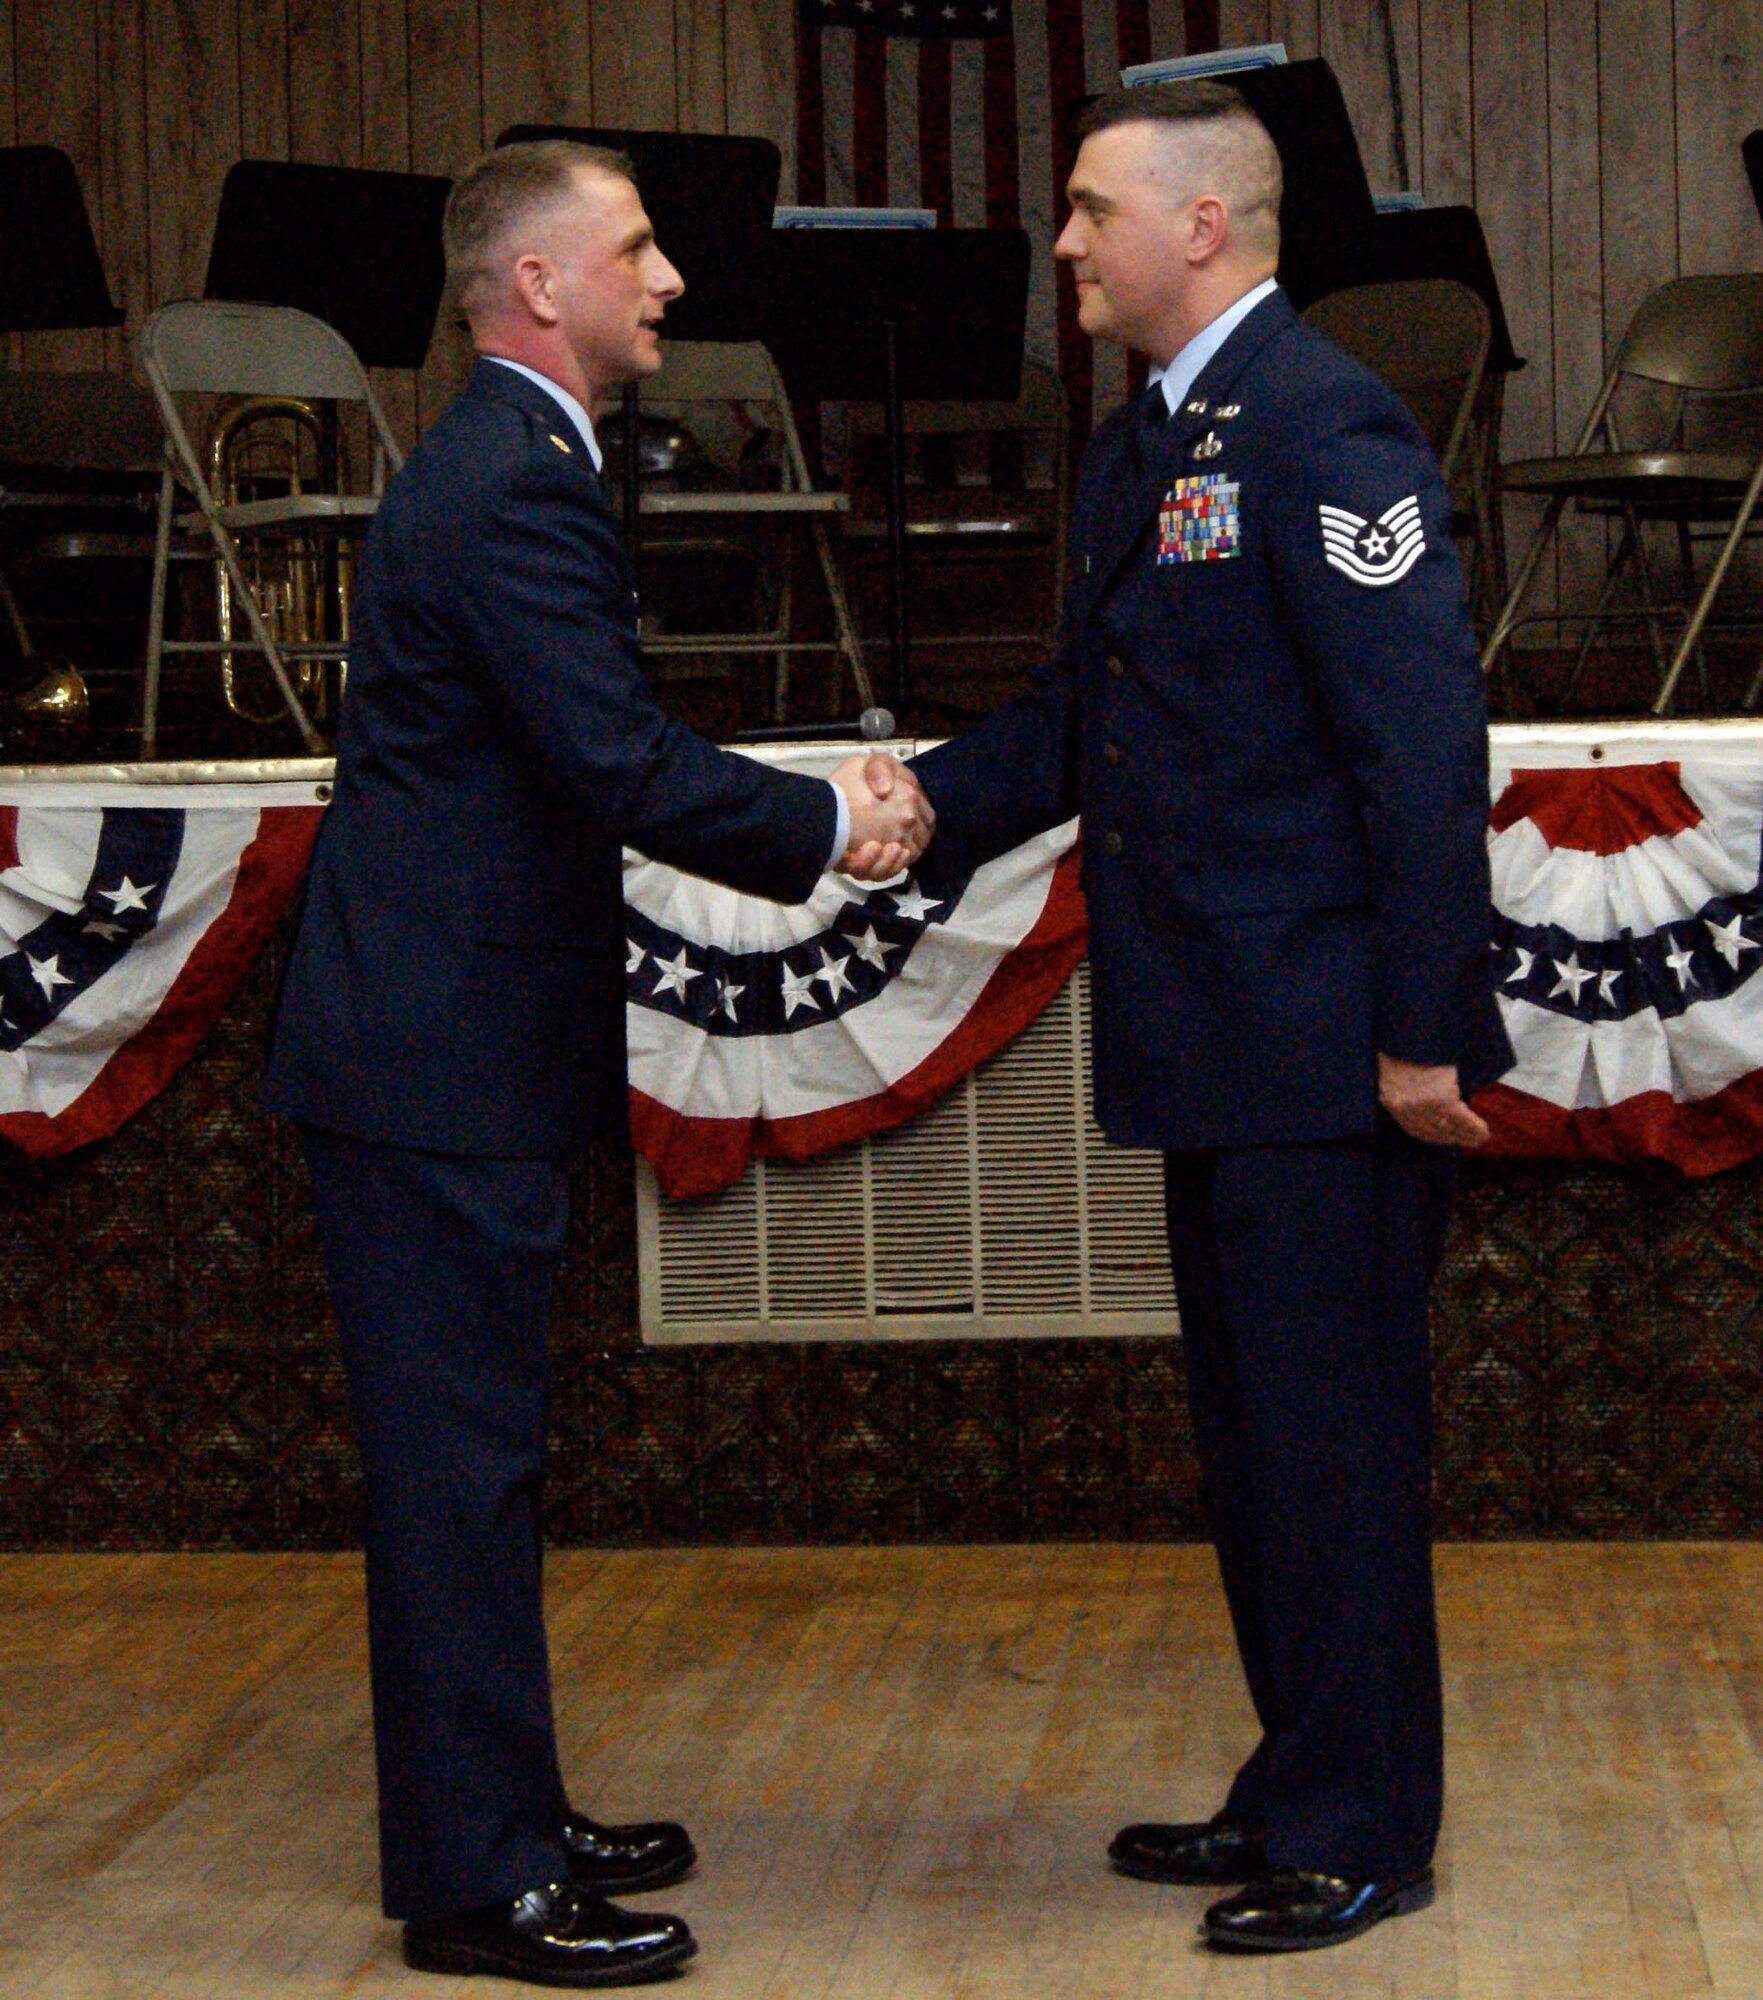 Maj. Darrin DeReus, 22nd Comptroller Squadron commander, shakes hands with Tech. Sgt. Wayne Herold, 22nd Air Refueling Wing Ground Safety technician, Feb. 9, 2011, Burwell, Neb.  On his own accord, Sergeant Herold researched and campaigned to help Mr. Gordon Ballagh, World War II veteran, receive his medals after more than 65 years.  (courtesy photo)